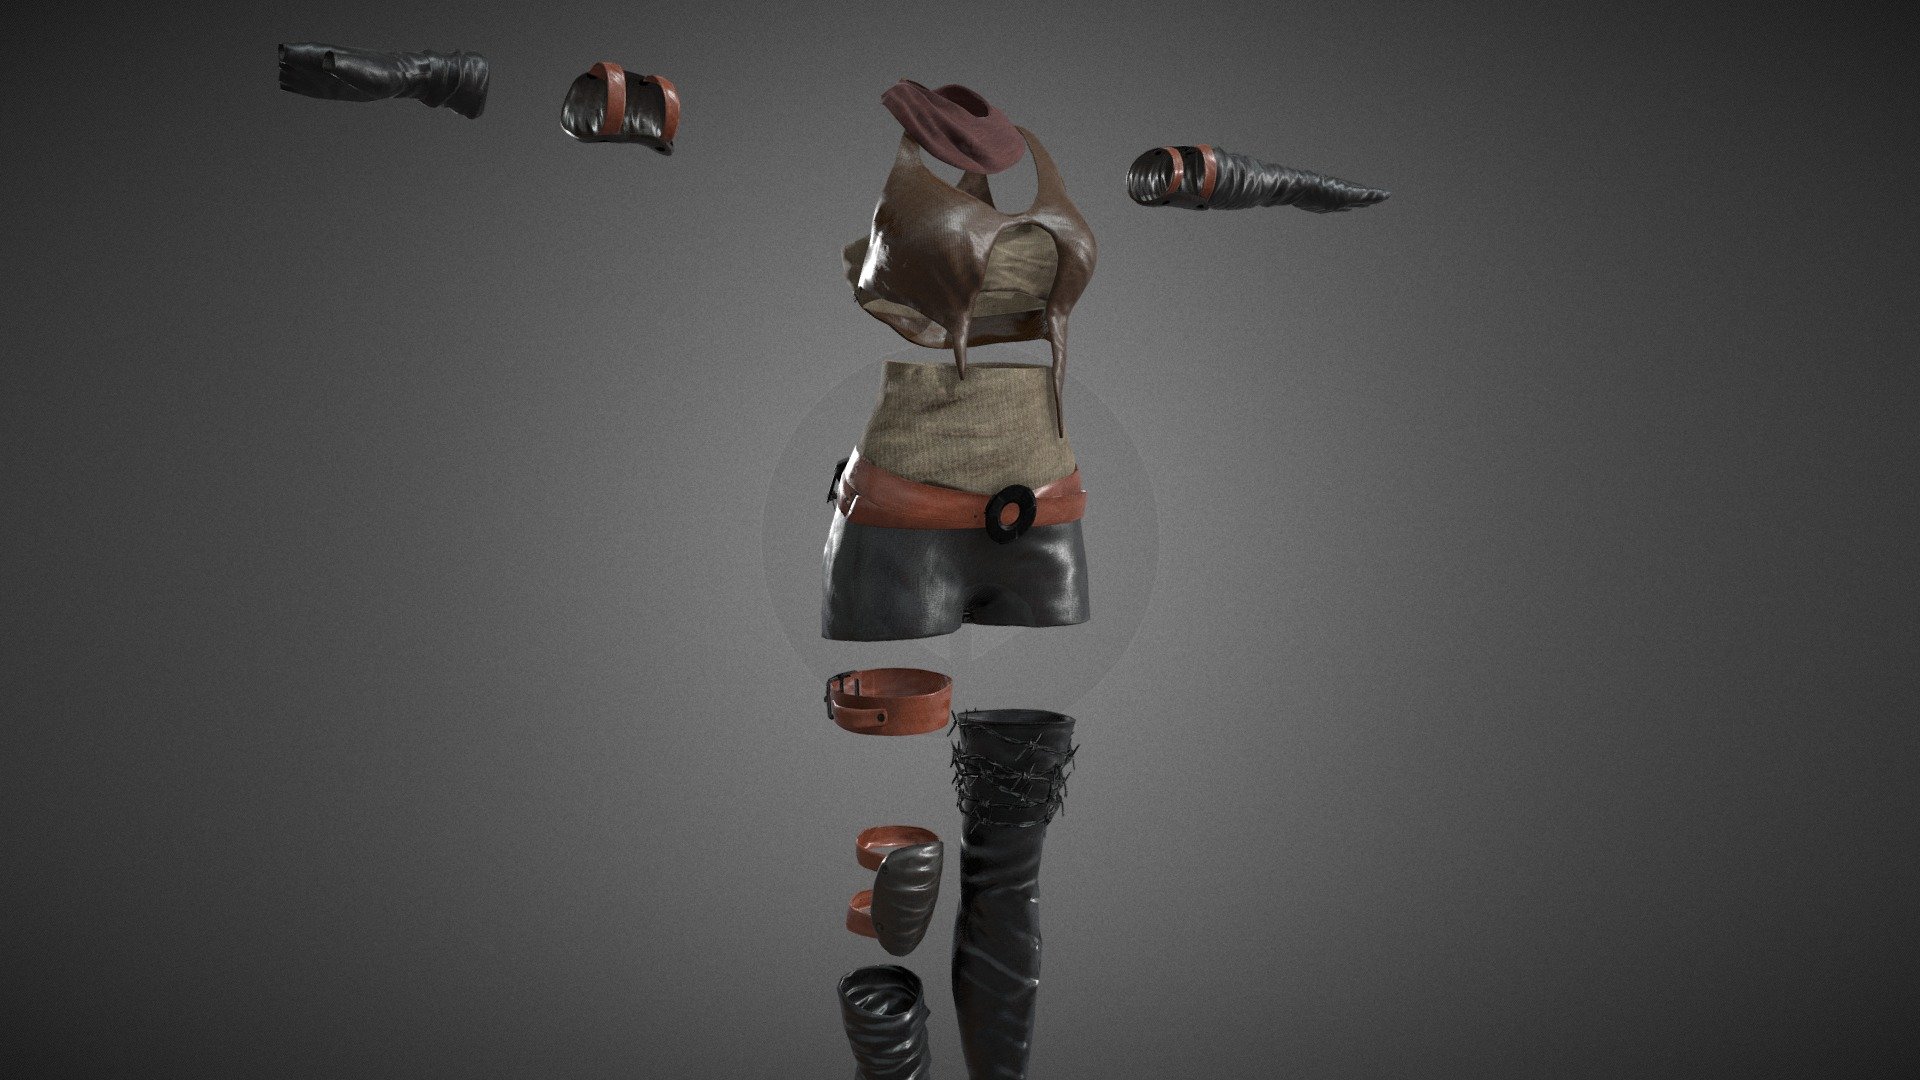 CG StudioX Present :
Female Warrior Outfit lowpoly/PBR




This is Female Warrior Outfit Comes with Specular and Metalness PBR.

The photo been rendered using Marmoset Toolbag 3 (real time game engine )


Features :



Comes with Specular and Metalness PBR 4K texture .

Good topology.

Low polygon geometry.

The Model is prefect for game for both Specular workflow as in Unity and Metalness as in Unreal engine .

The model also rendered using Marmoset Toolbag 3 with both Specular and Metalness PBR and also included in the product with the full texture.

The product has ID map in every part for changing any part in the model .

The texture can be easily adjustable .


Texture :



ALL Texture [Albedo -Normal-Metalness -Roughness-Gloss-Specular-ID-AO] (4096*4096)

Three objects (Top-Pants-Boots) each one has it own UV set and textures.


Files :
Marmoset Toolbag 3 ,Maya,,FBX,OBj with all the textures.




Contact me for if you have any questions.
 - Female Warrior Outfit - Buy Royalty Free 3D model by CG StudioX (@CG_StudioX) 3d model